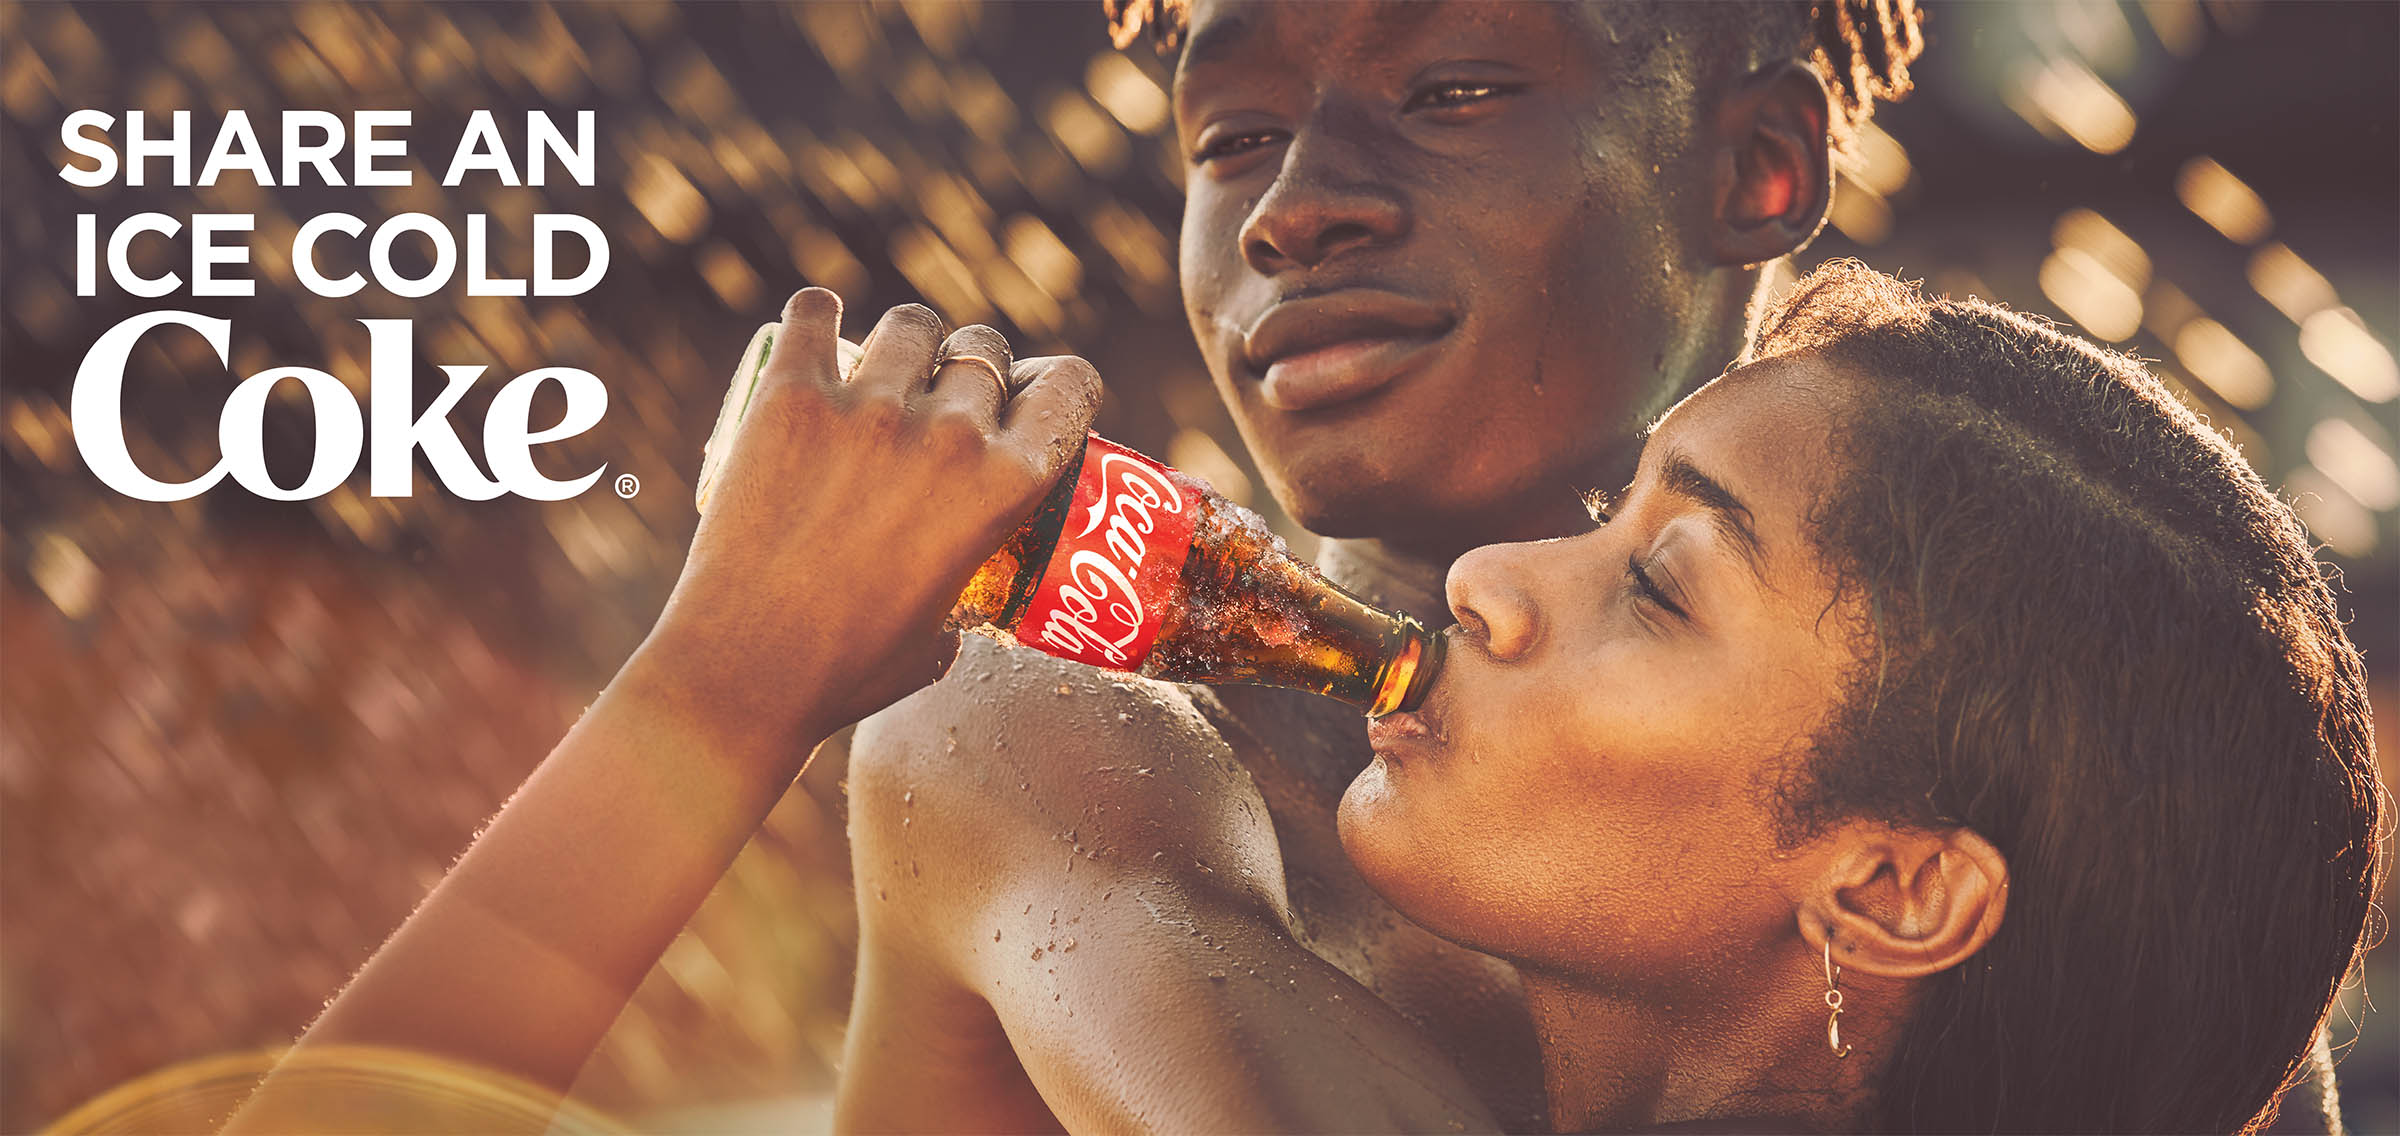 Billboard of teens with Coca-Cola. Says "Share an ice cold Coke".